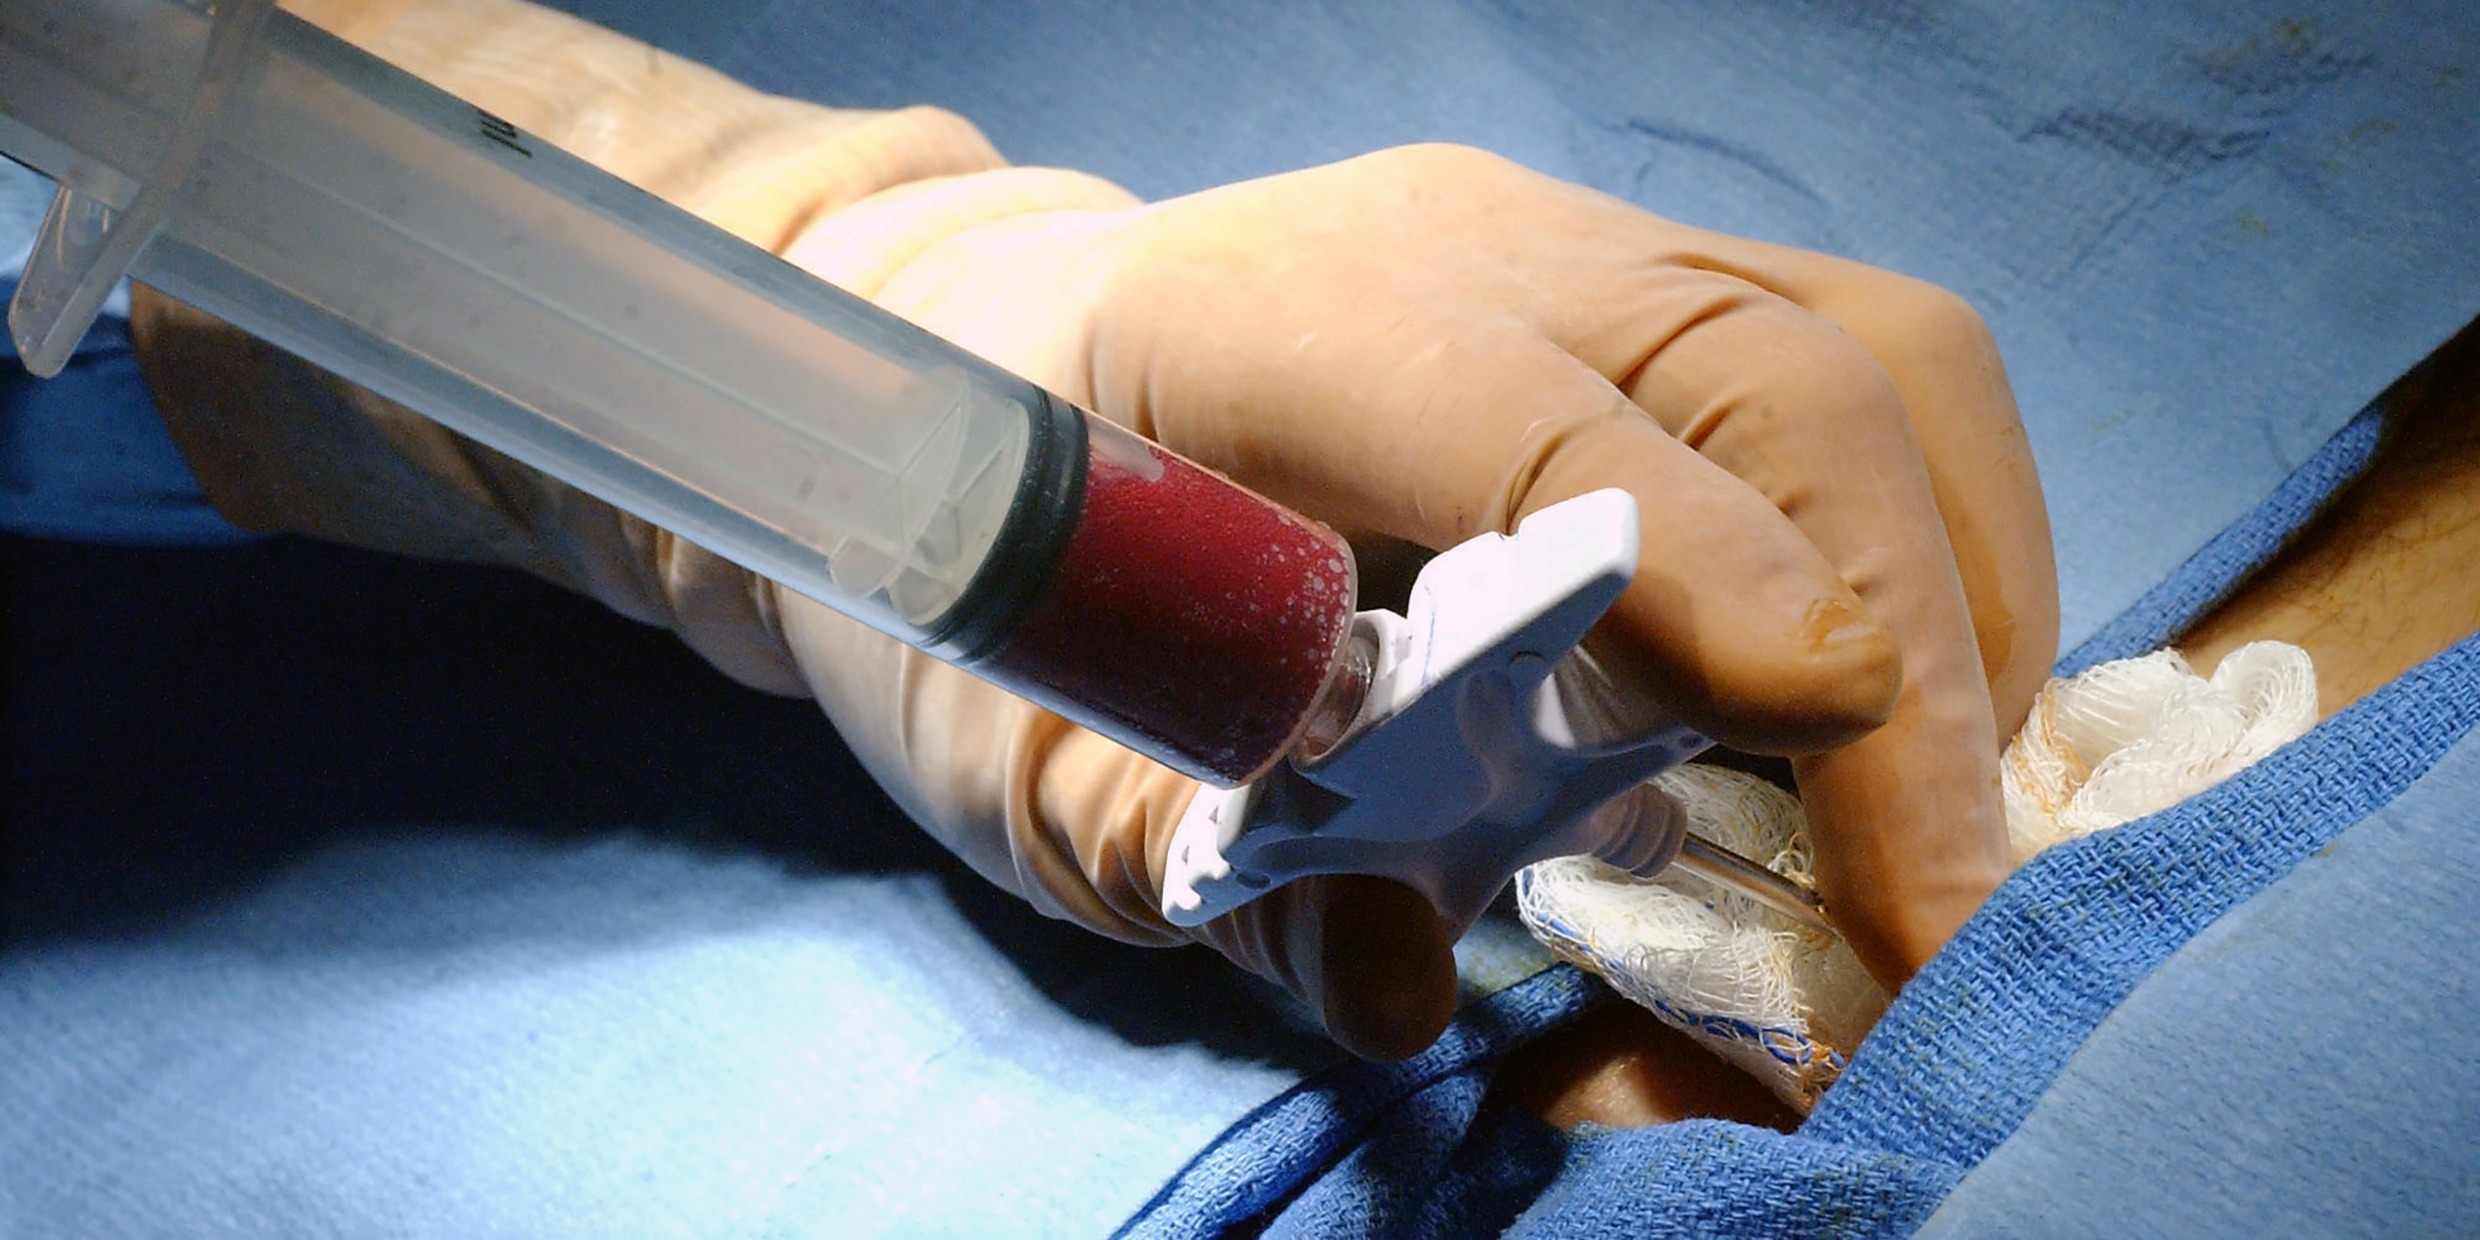 Image of bone marrow being drawn from a patient